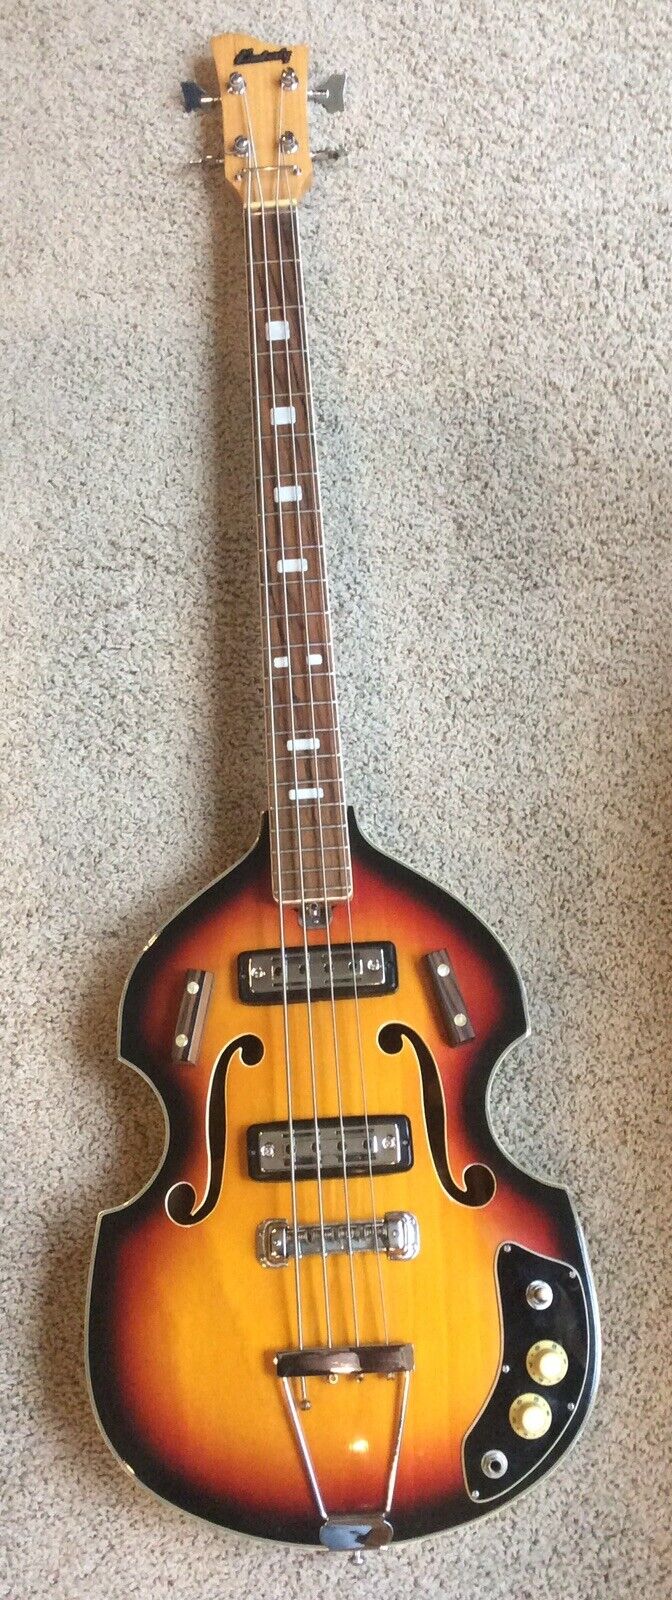 Kimberly Teisco Violin Beatle Bass w/ Case Made In Japan Vintage ‘70s